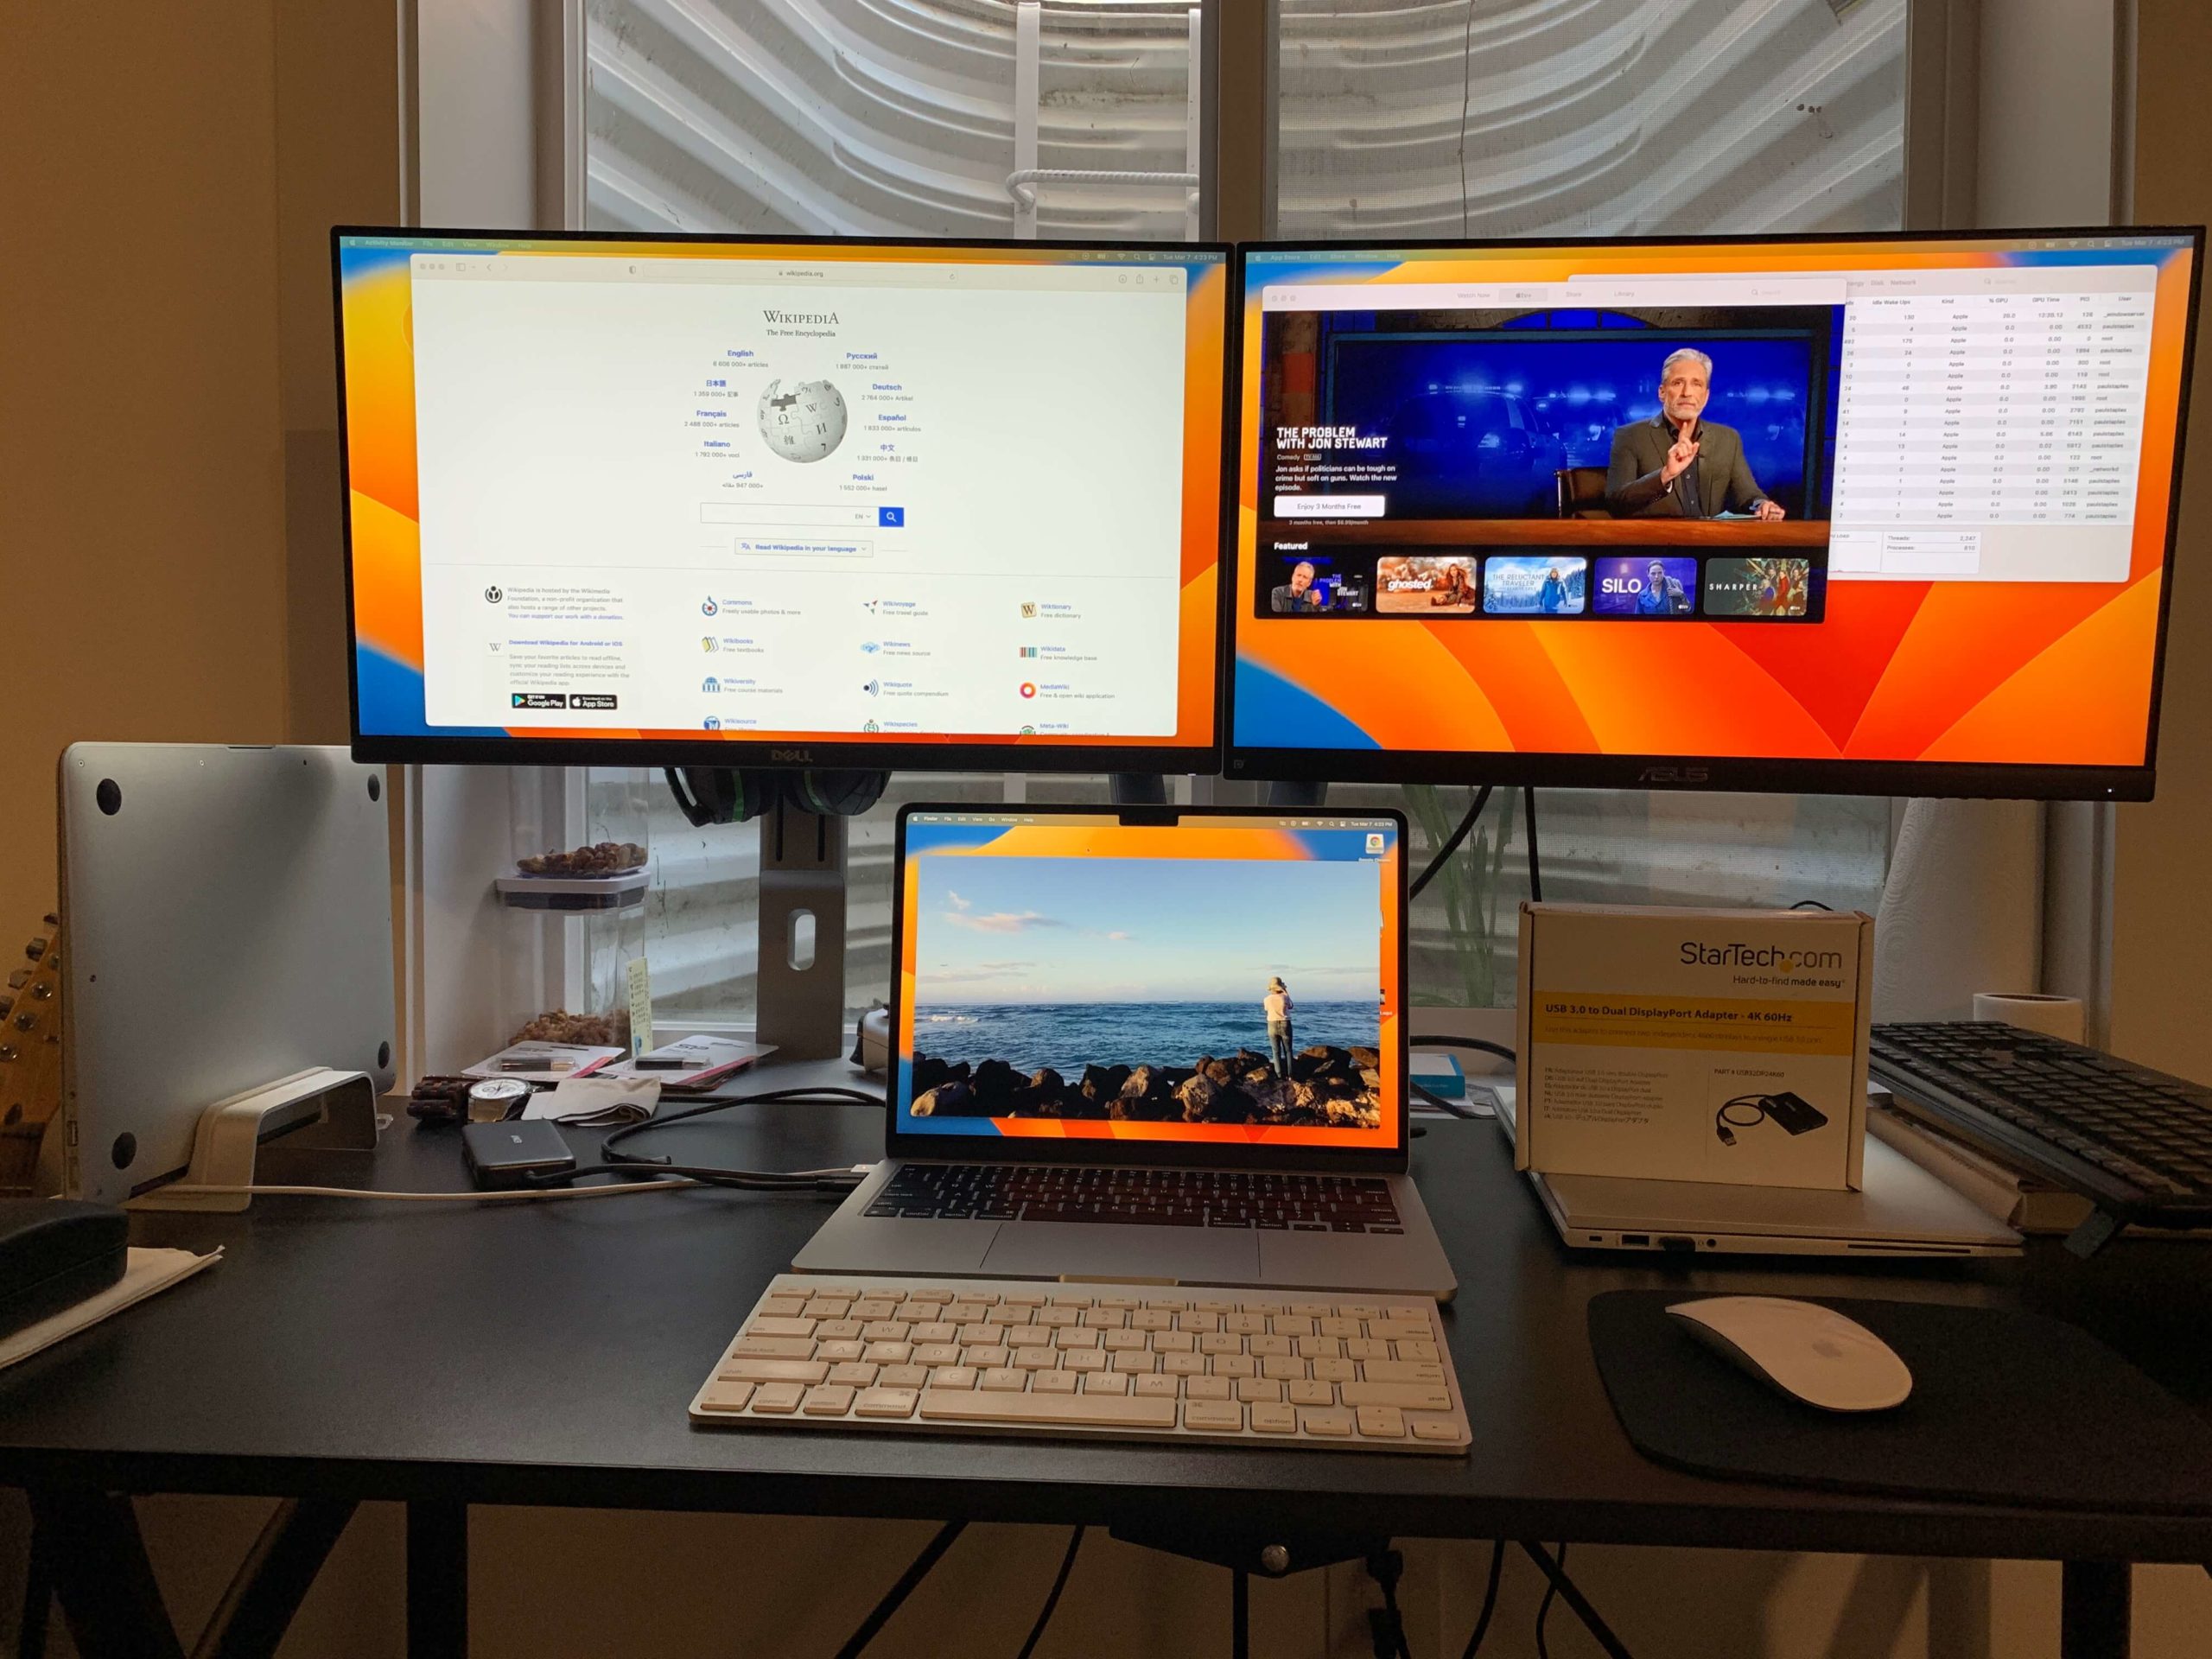 How to Add a Second External Display to Your M2 MacBook